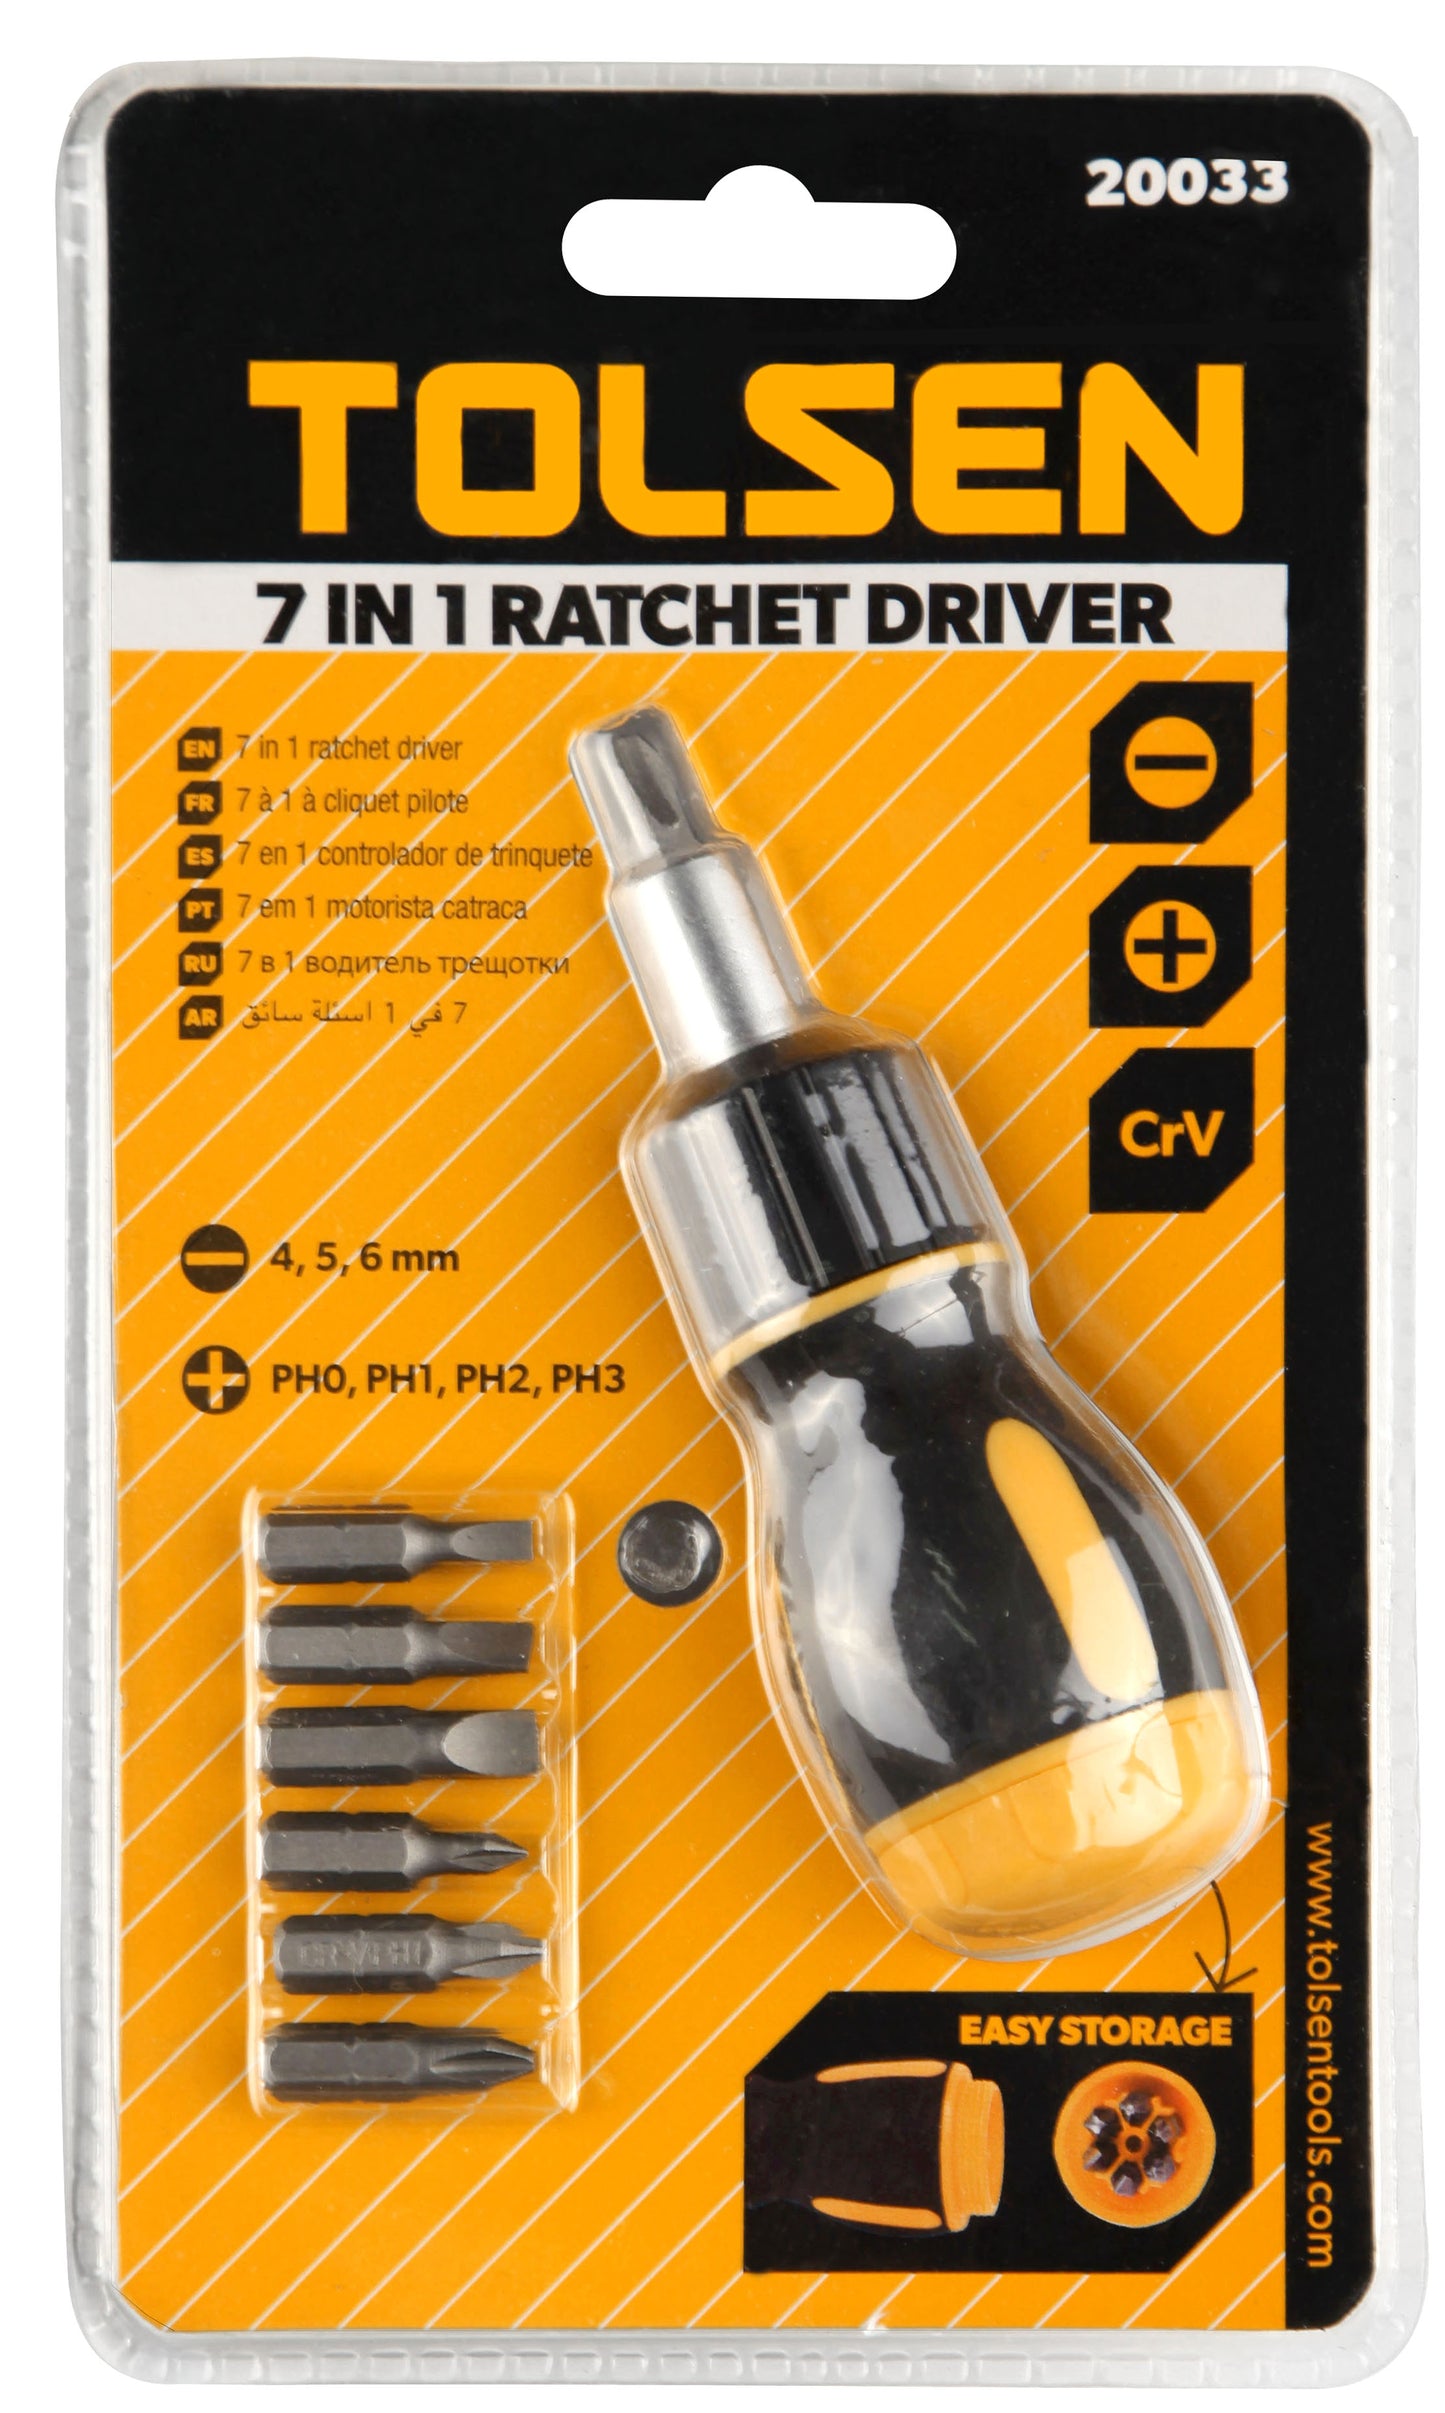 7 IN 1 RATCHET DRIVER